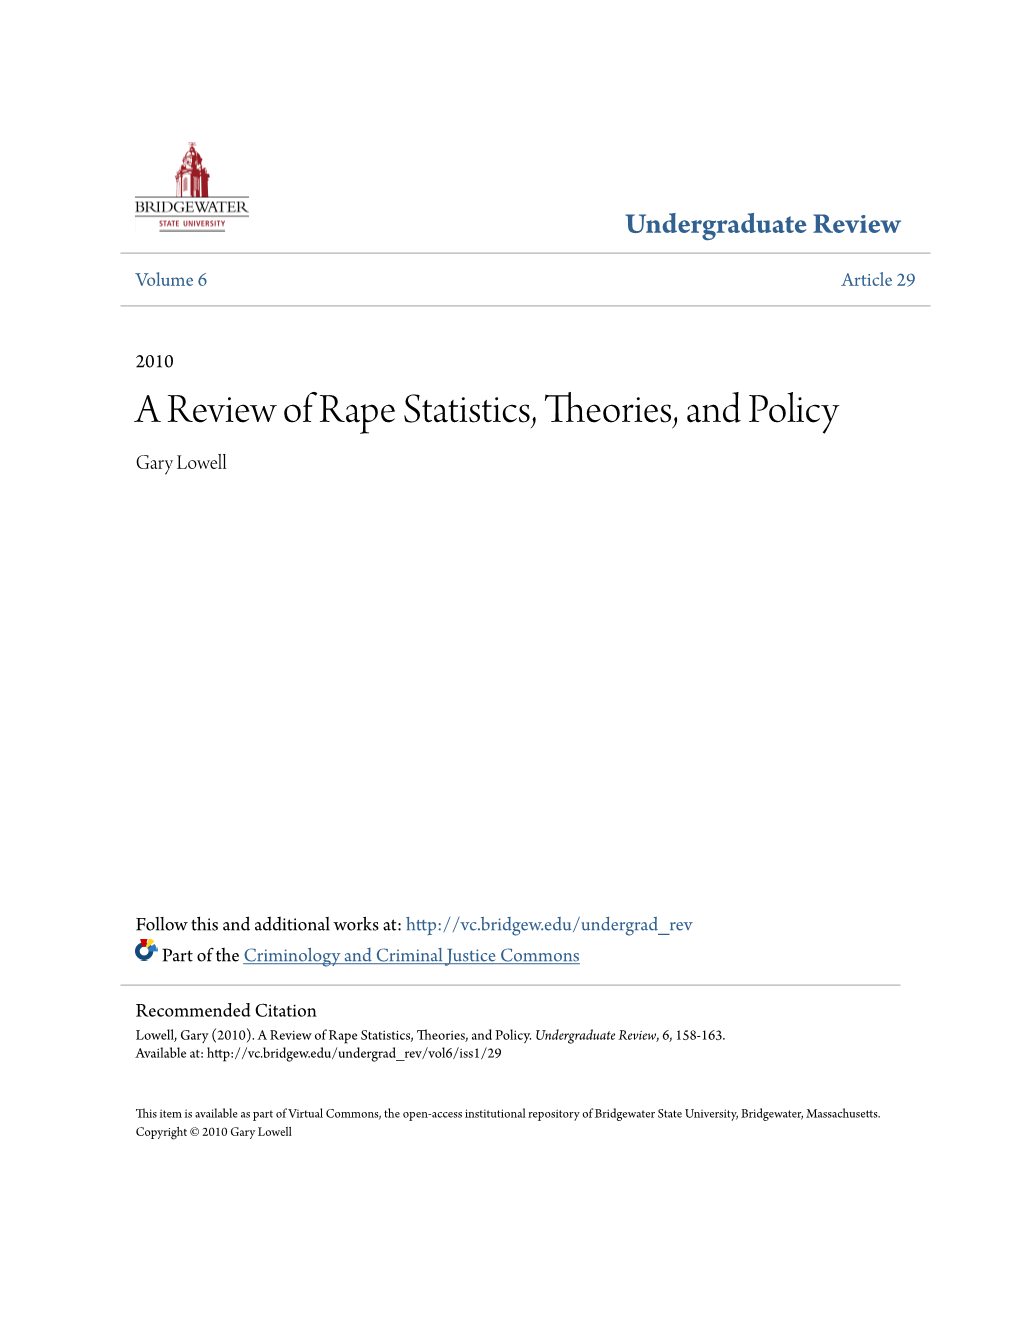 A Review of Rape Statistics, Theories, and Policy Gary Lowell